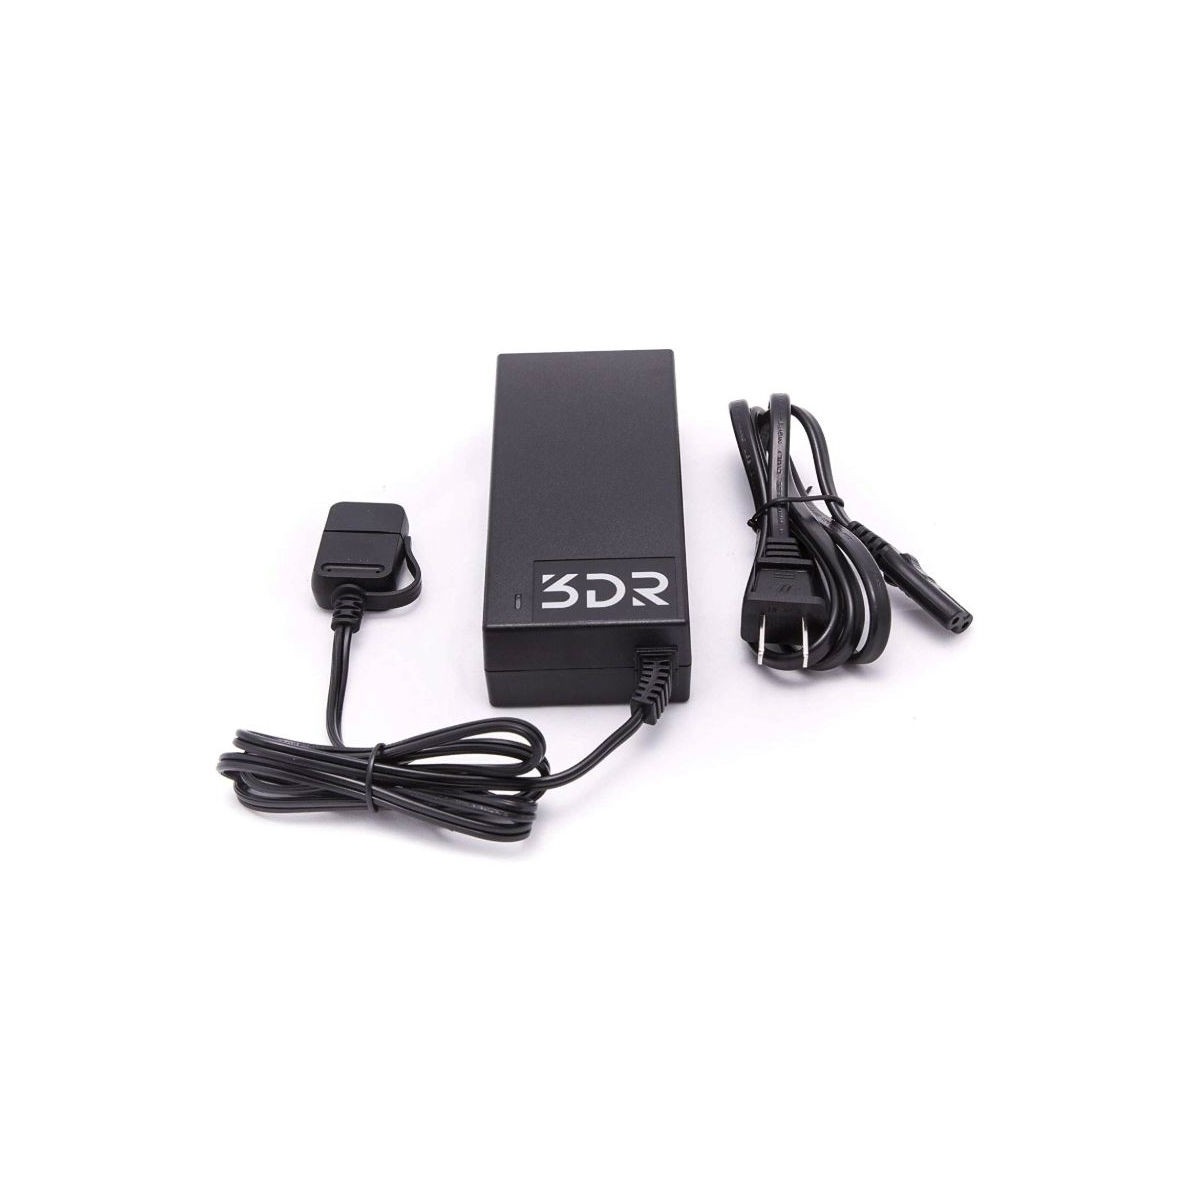 3DR Smart Drone Charger for 3DR Solo Drone SP15A (European model)